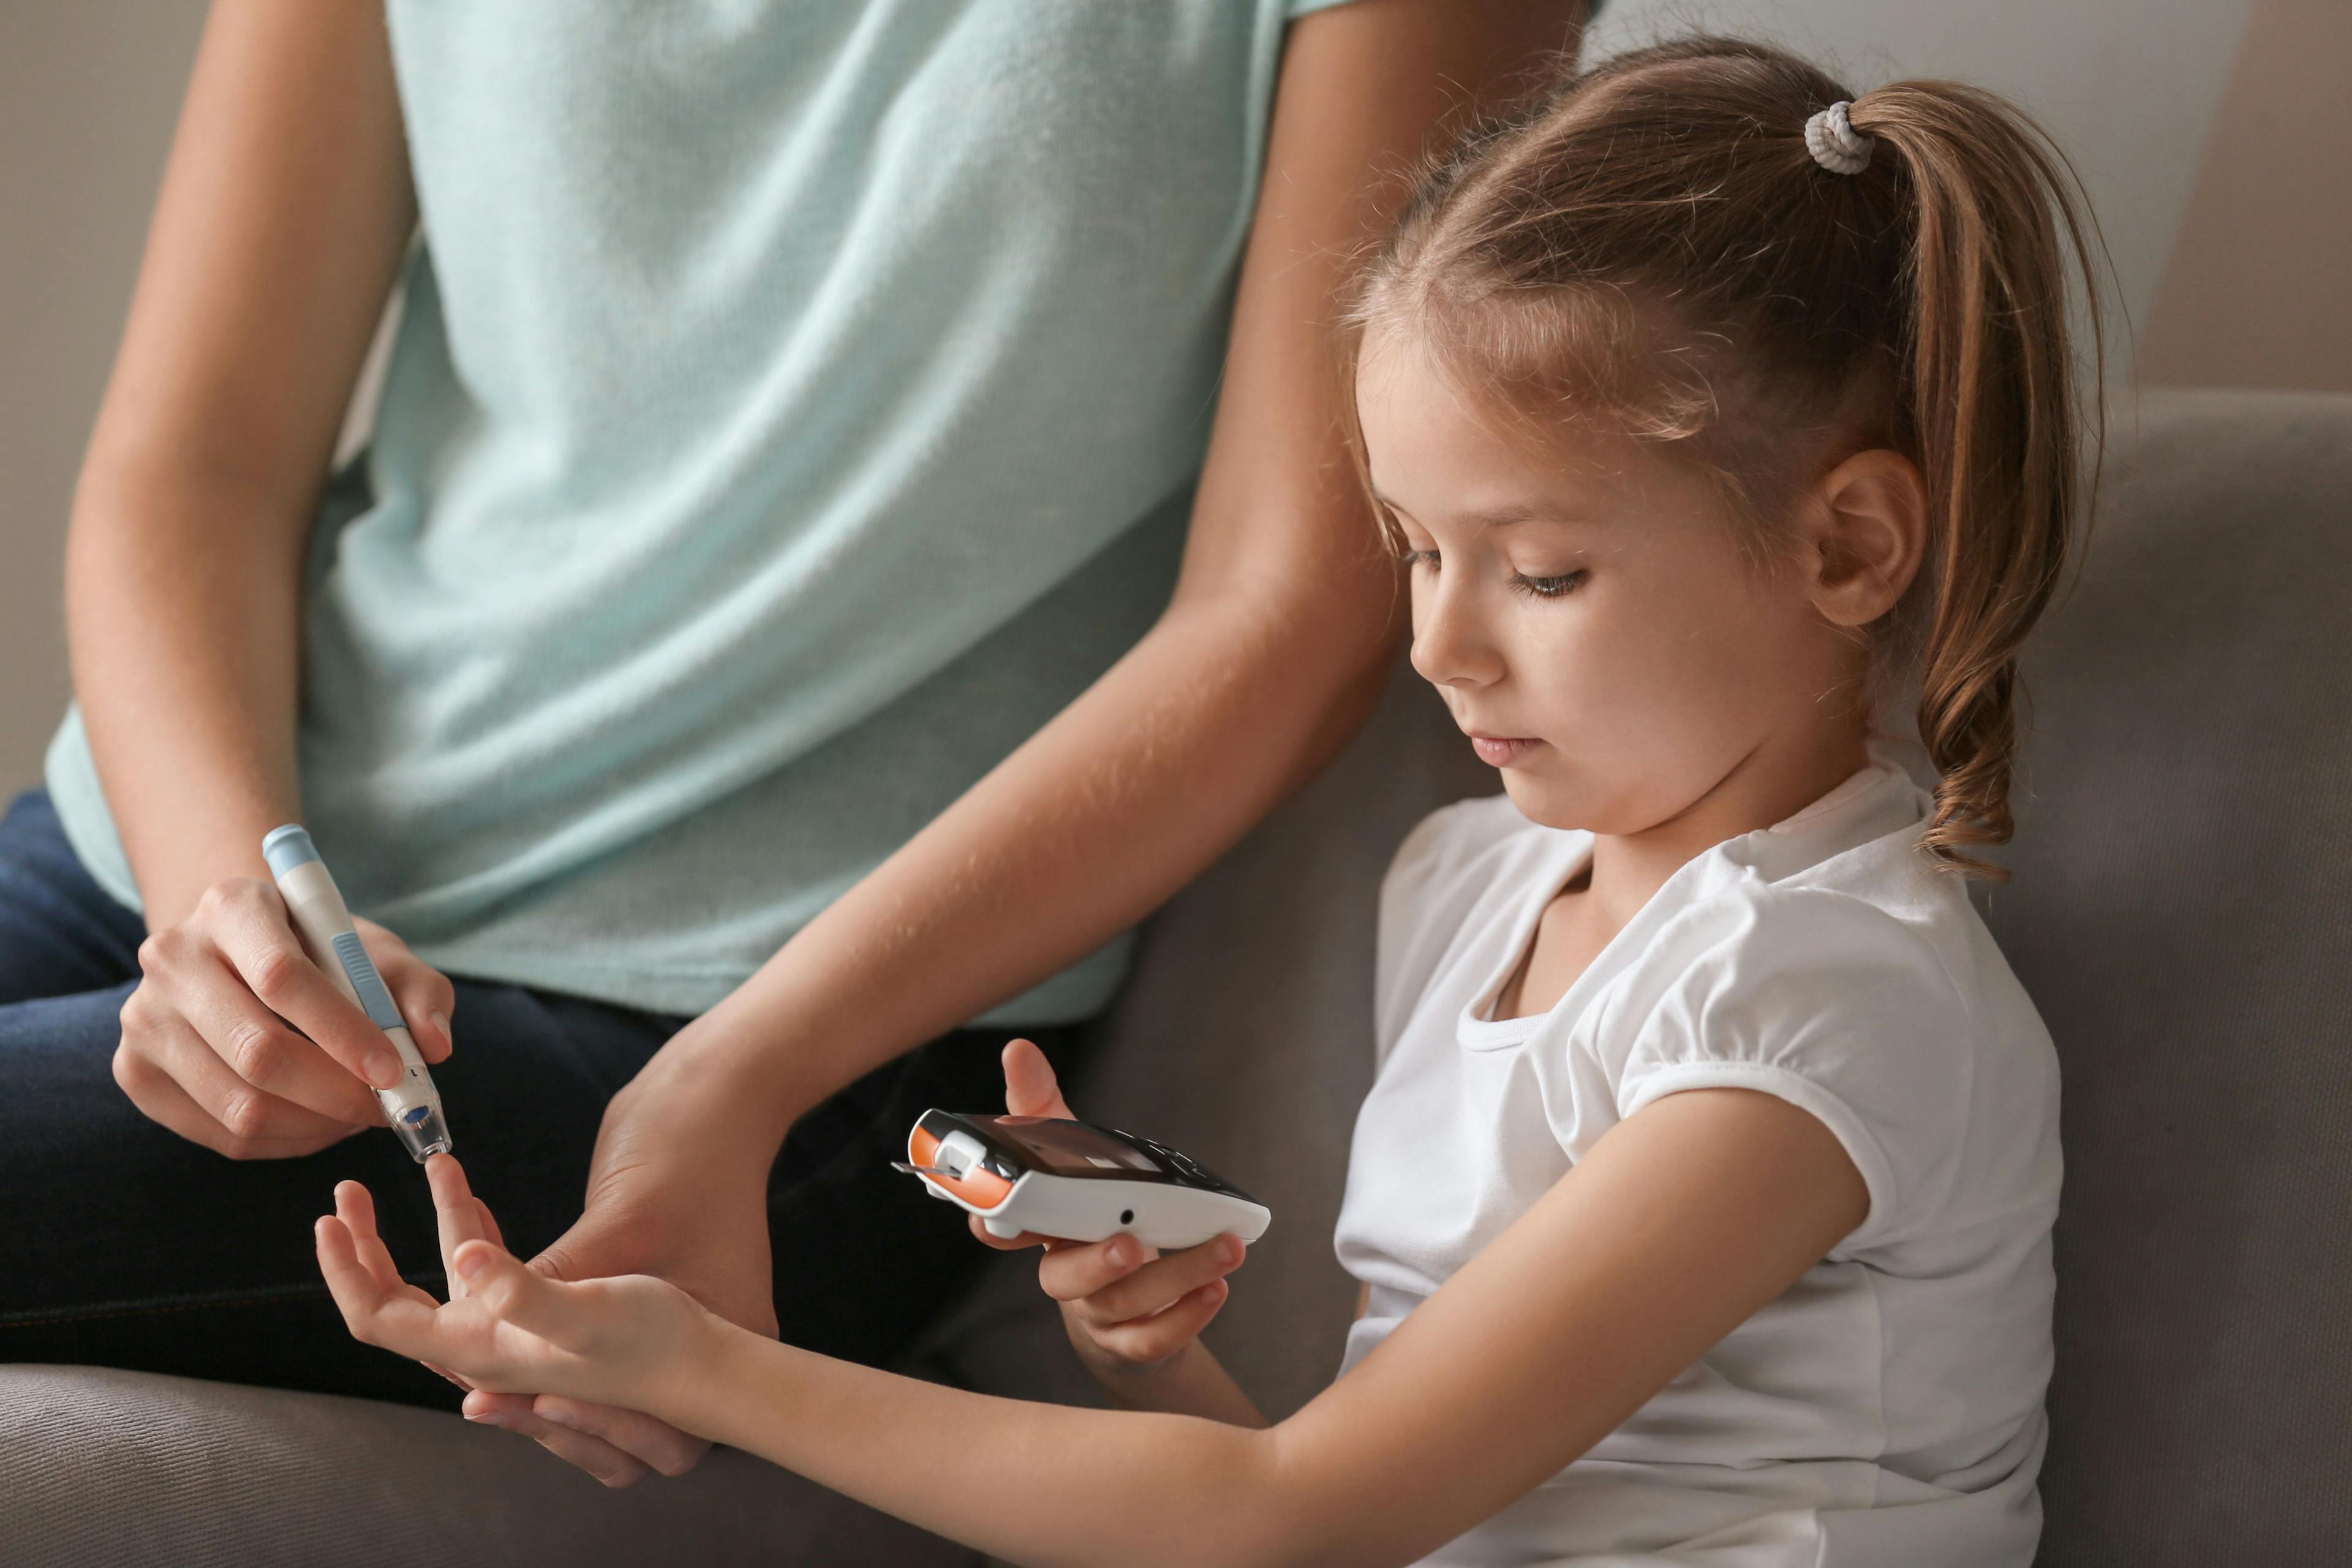 Today’s Effects of Telehealth When Caring for Diabetic Children